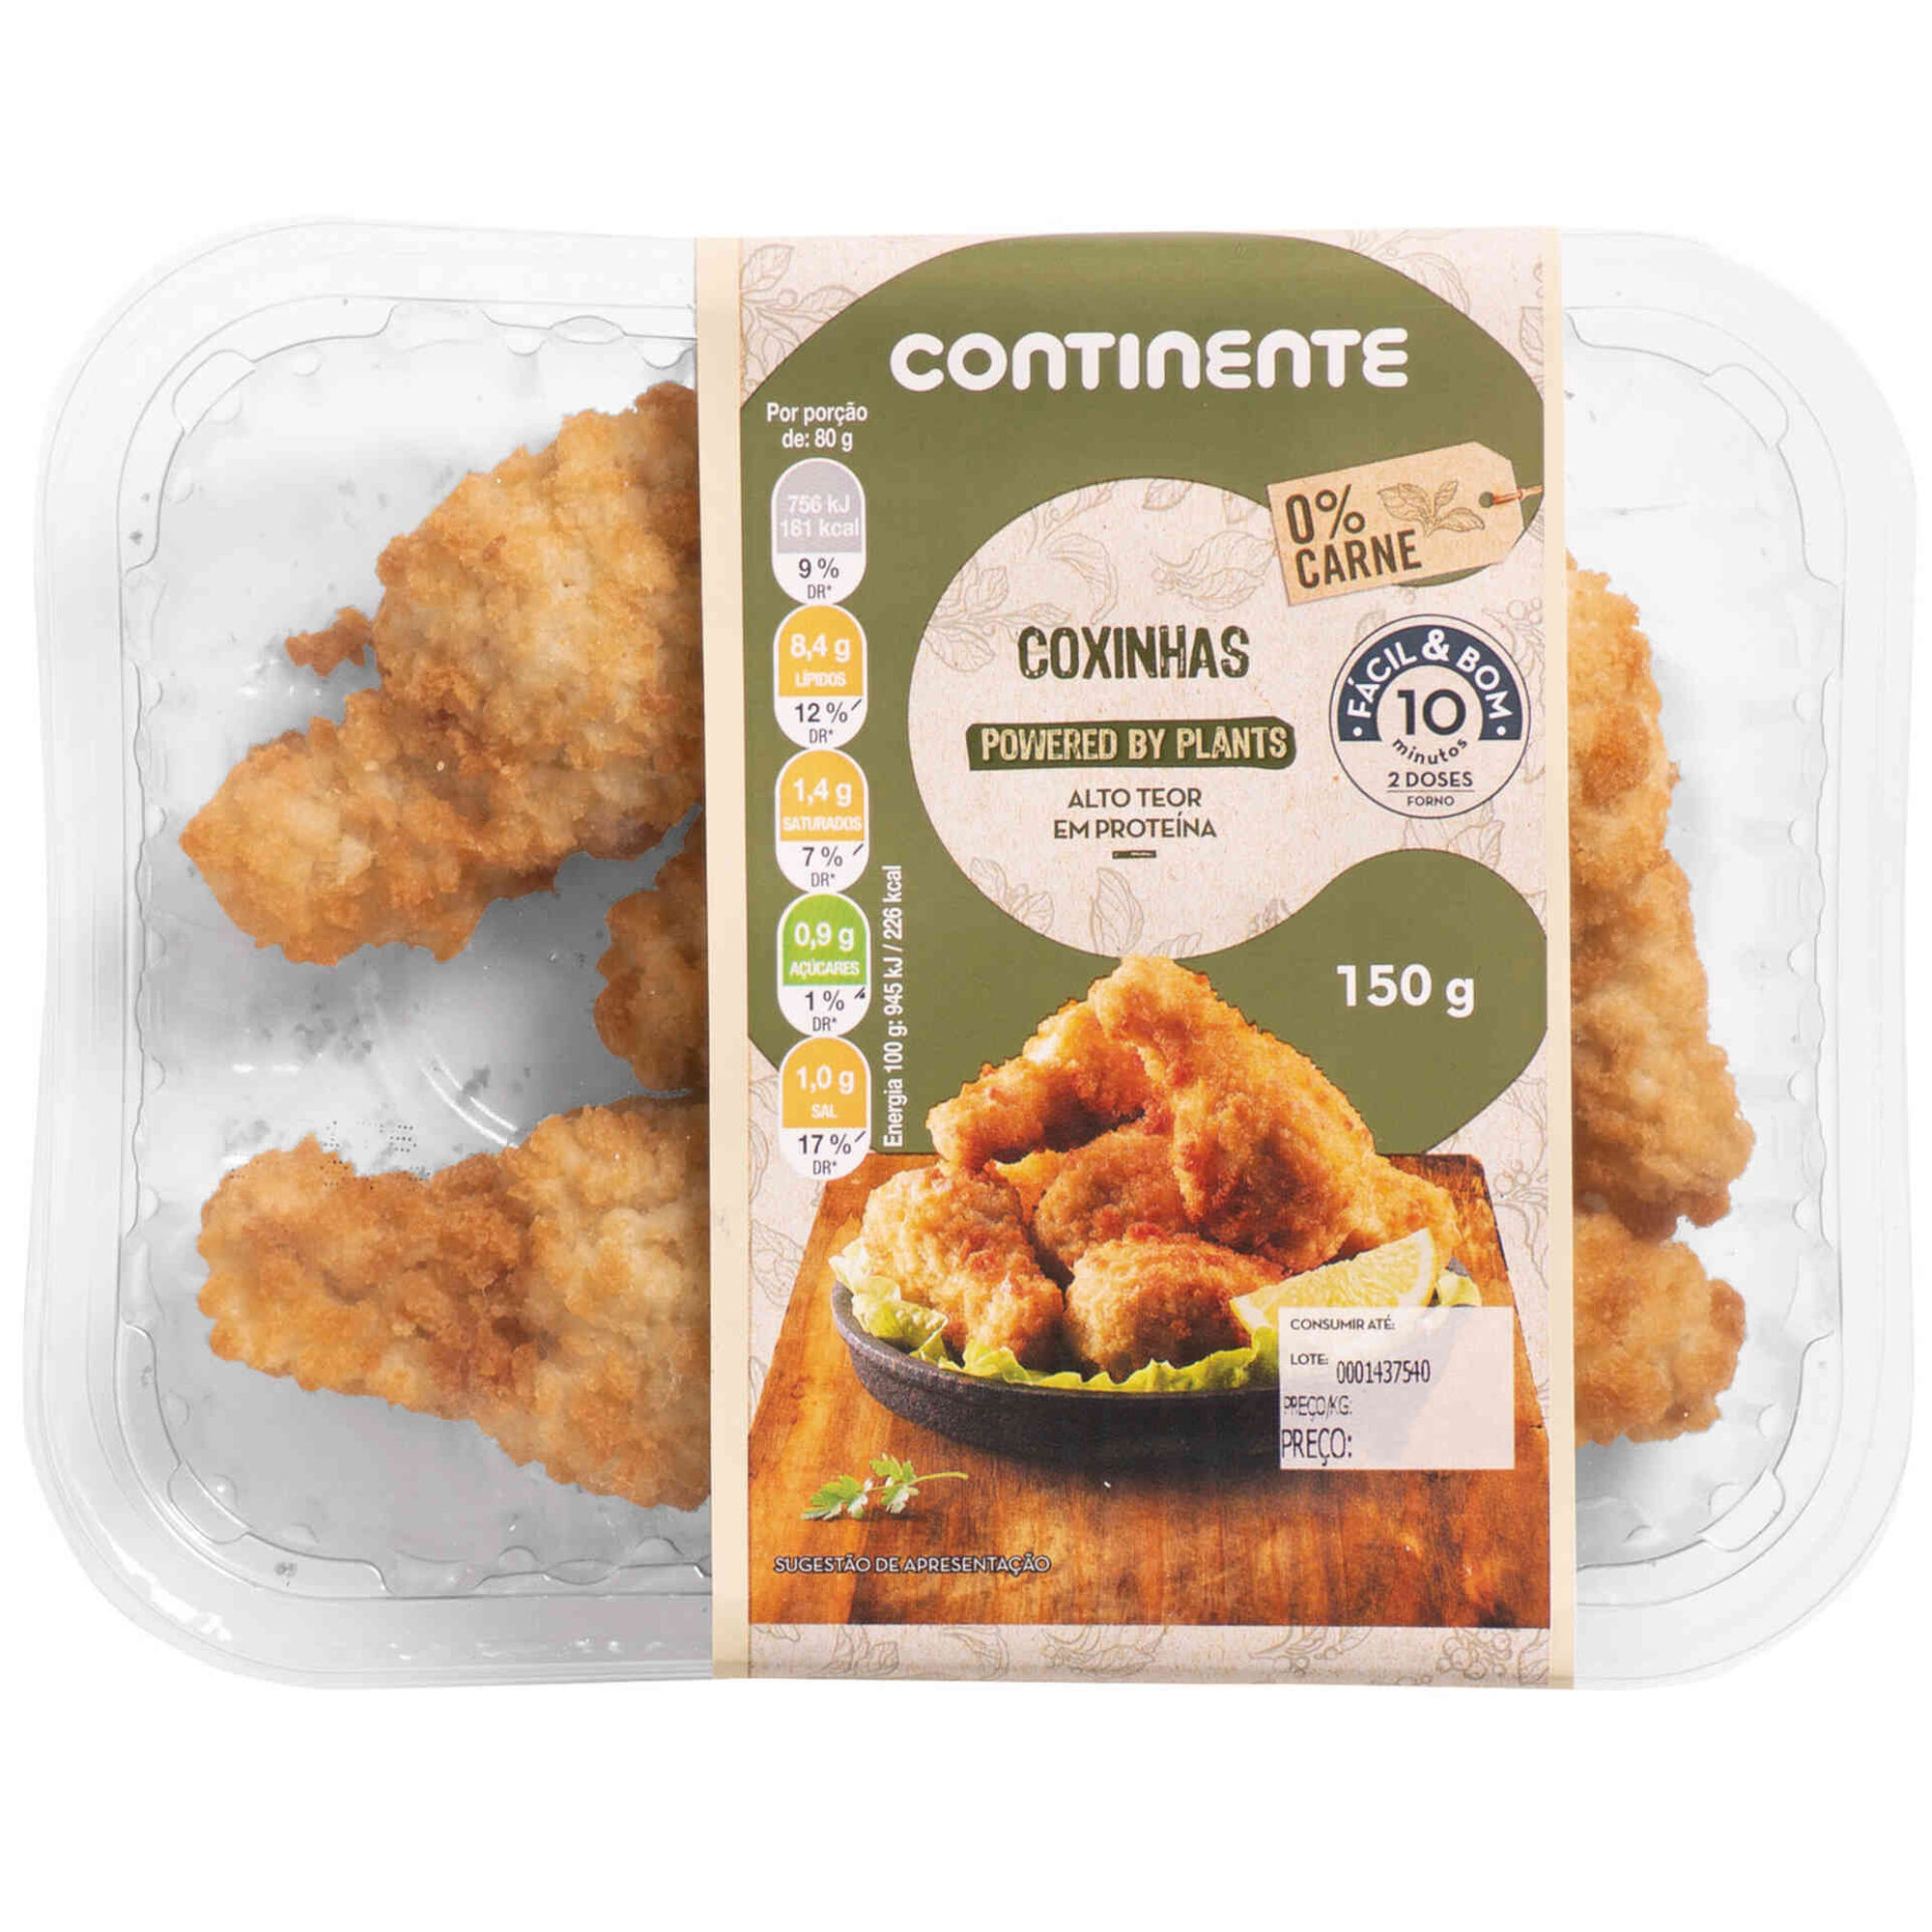 Coxinhas Powered by Plants